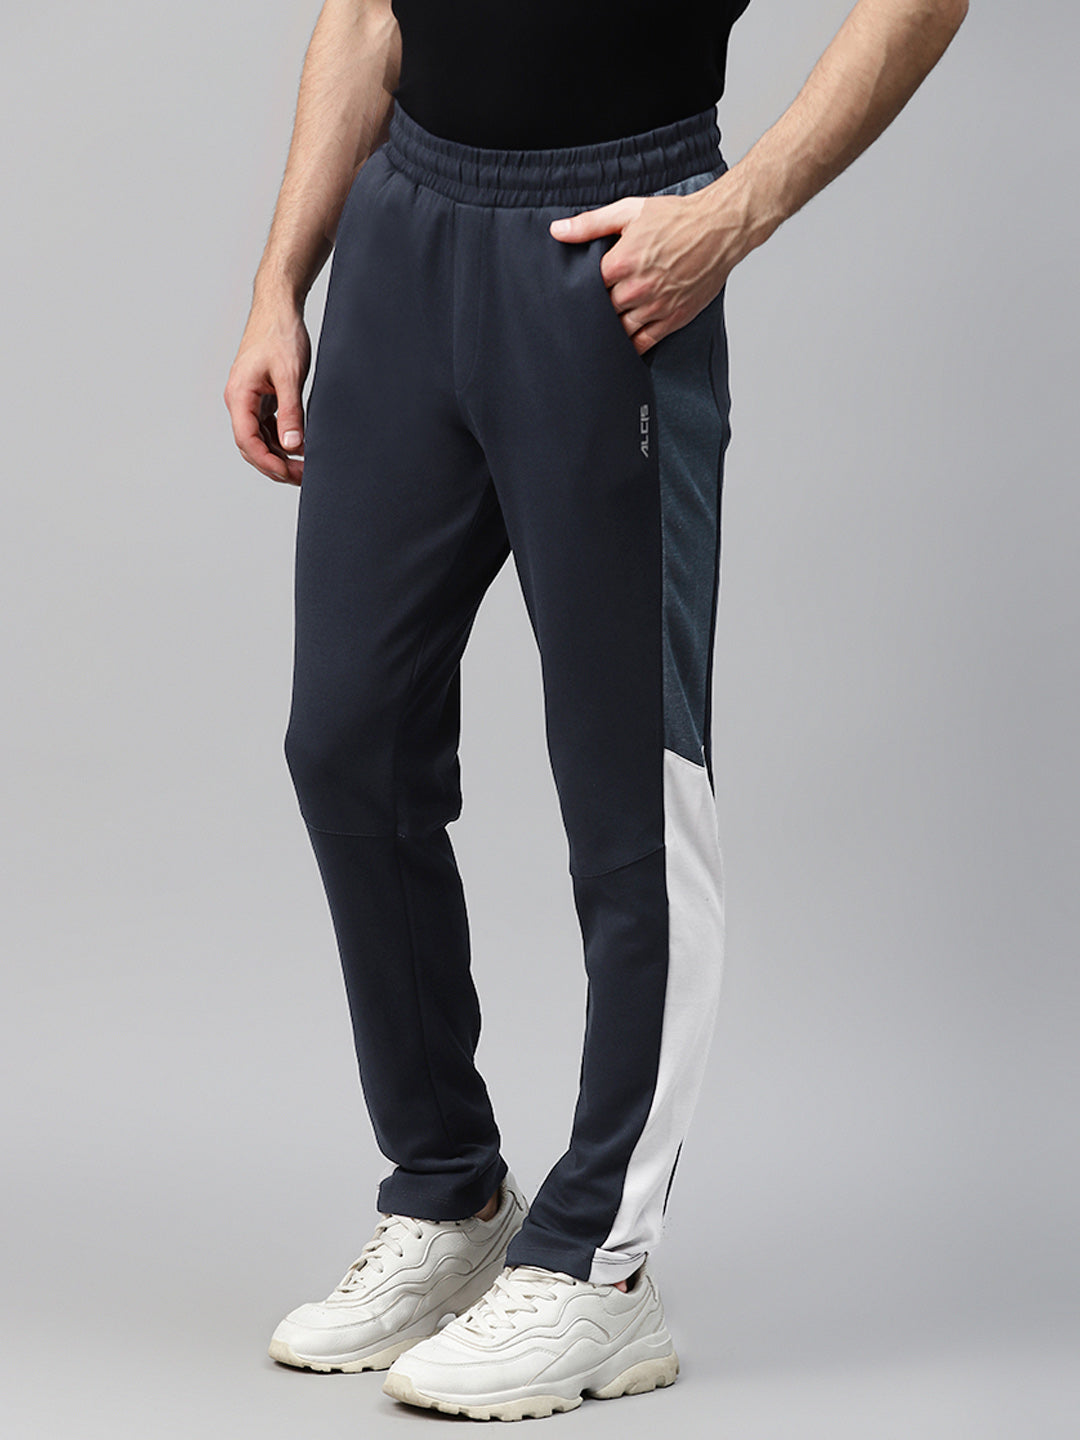 fcity.in - Men Lowers Payjama Track Pants Stylish Royal Pure Cotton Jogger